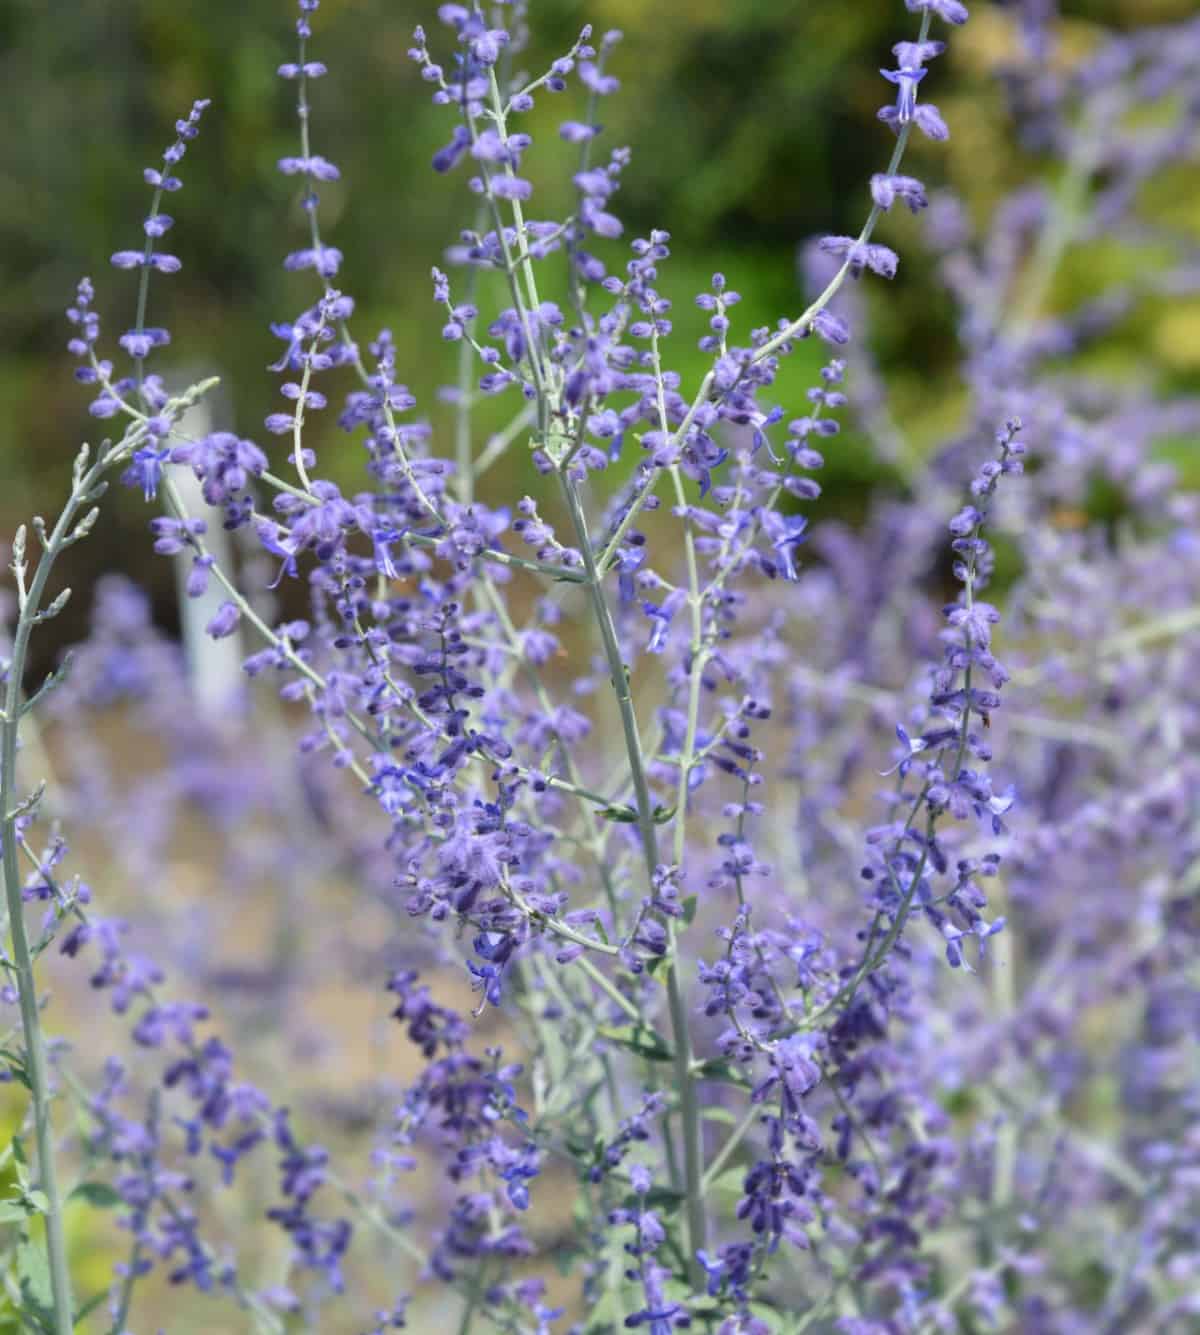 Russian sage thrives in the poorest soil conditions.